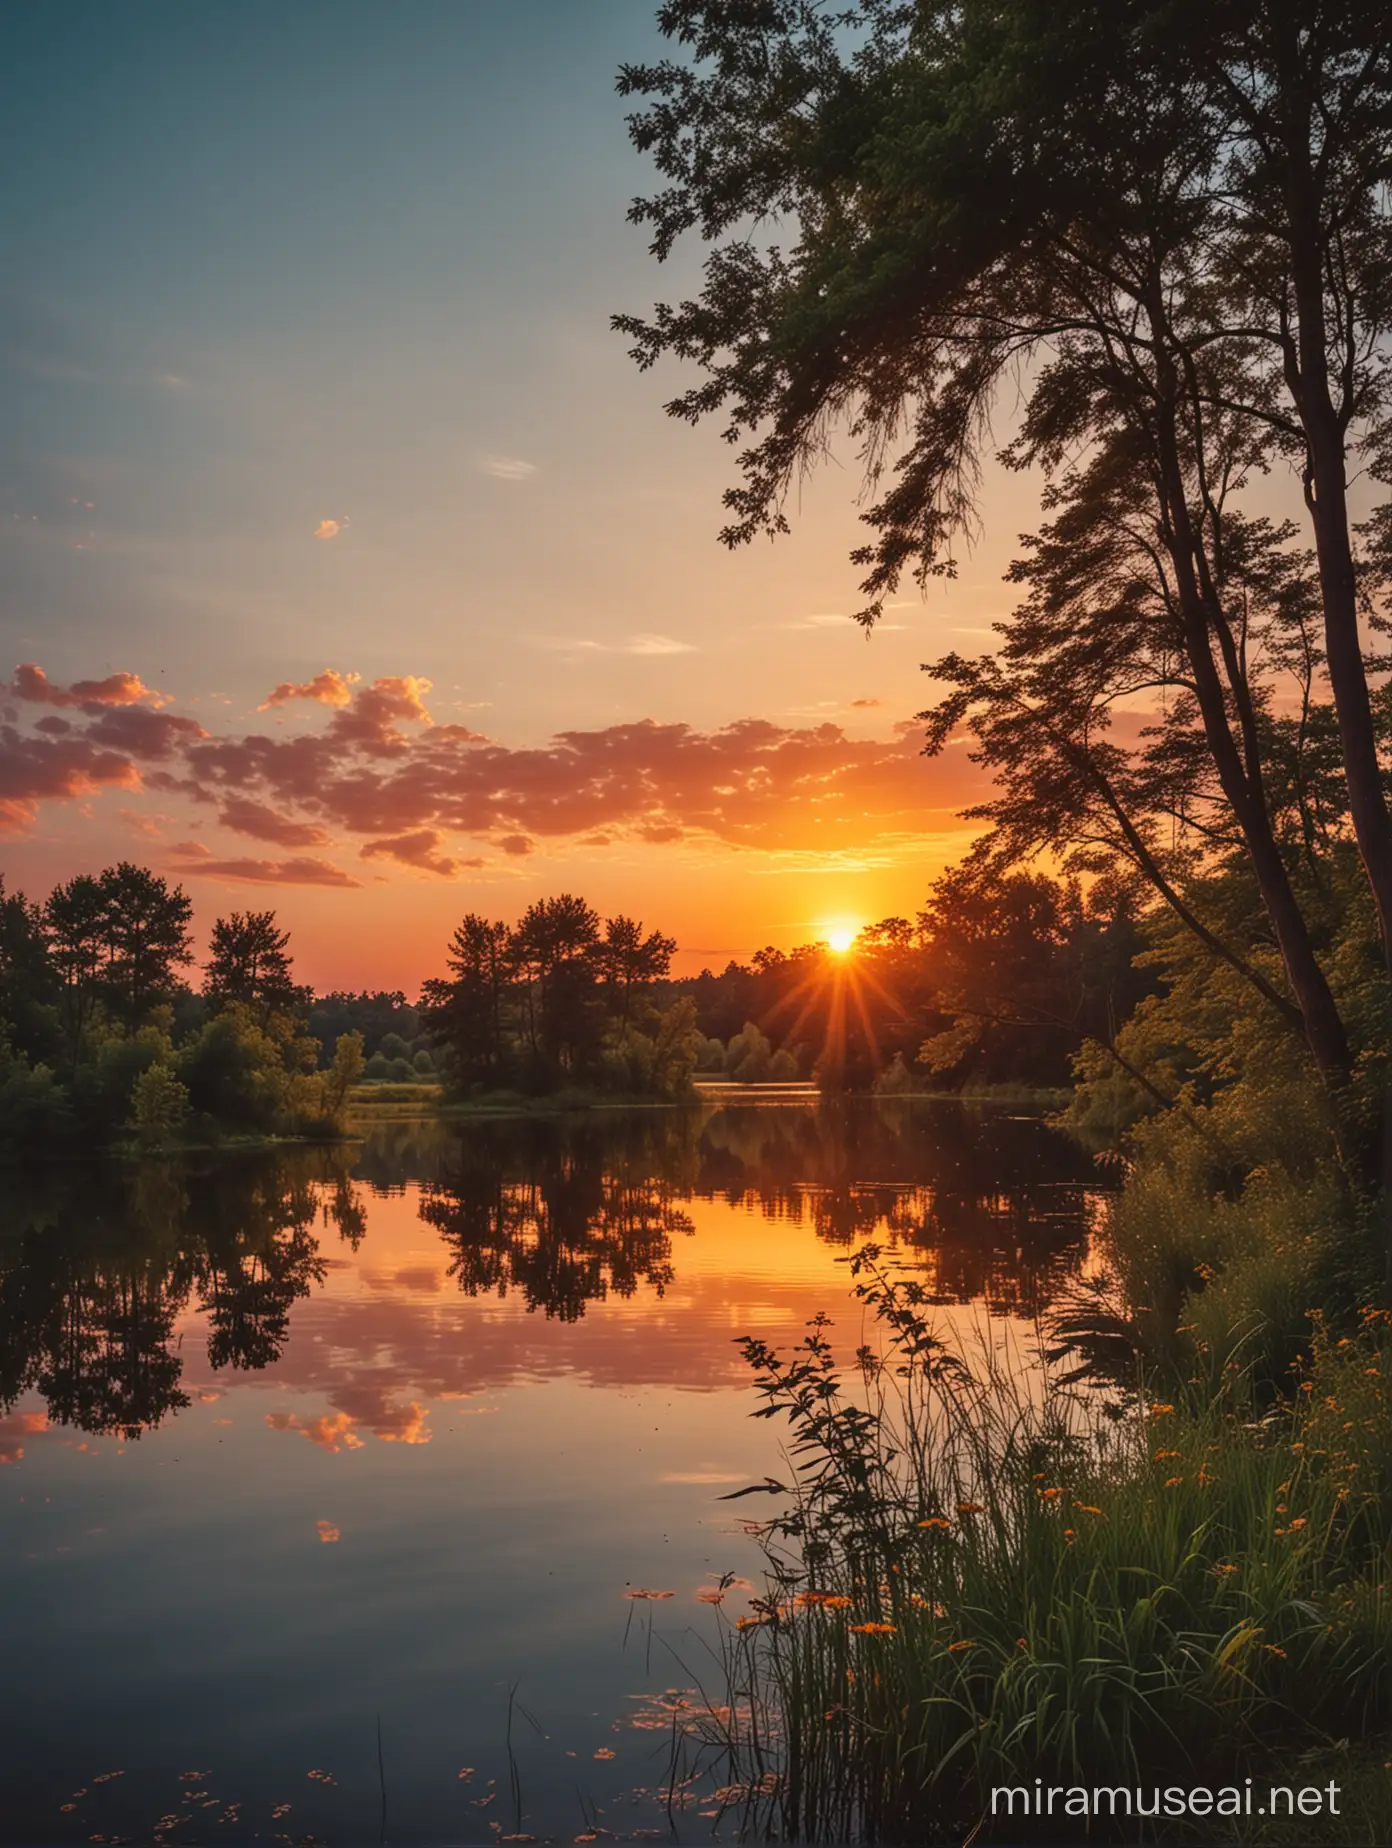 a wonderful photograph from a sunet near a lake in summer, serne feelings, nostalgic vibes, wonderful colors


